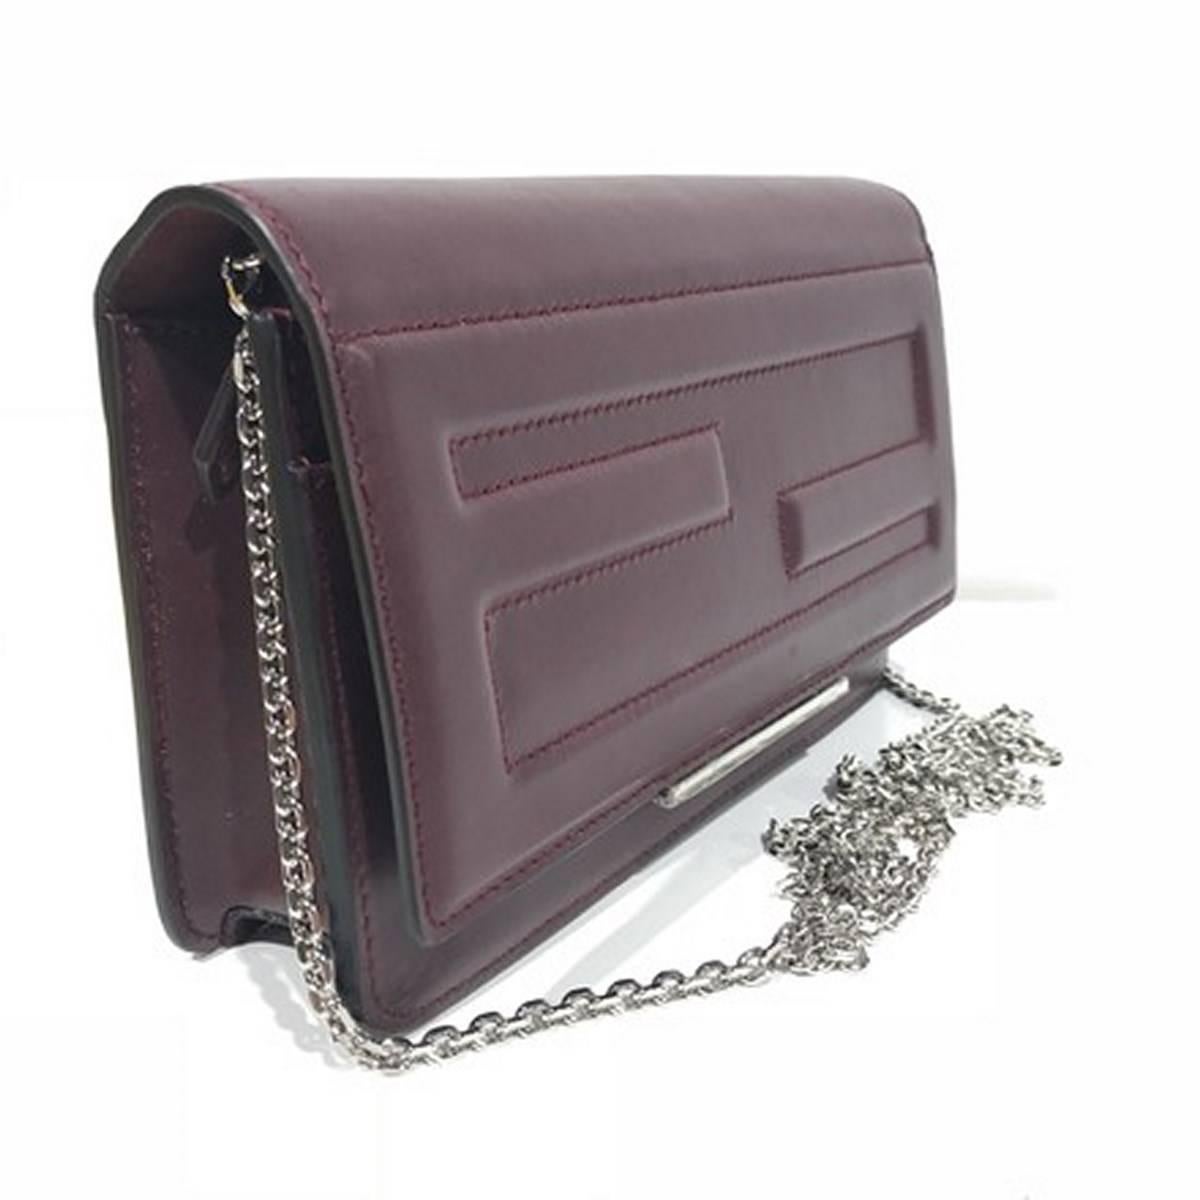 Brand new. 
Leather. 
Removable chain shoulder strap, 21.5” drop. 
Flap top with logo engraved bar, snap closure. 
Interior zip and slip pockets, six card slots. 
Made in Italy.
Size: 7.5"L x 4.9"H x 2"W